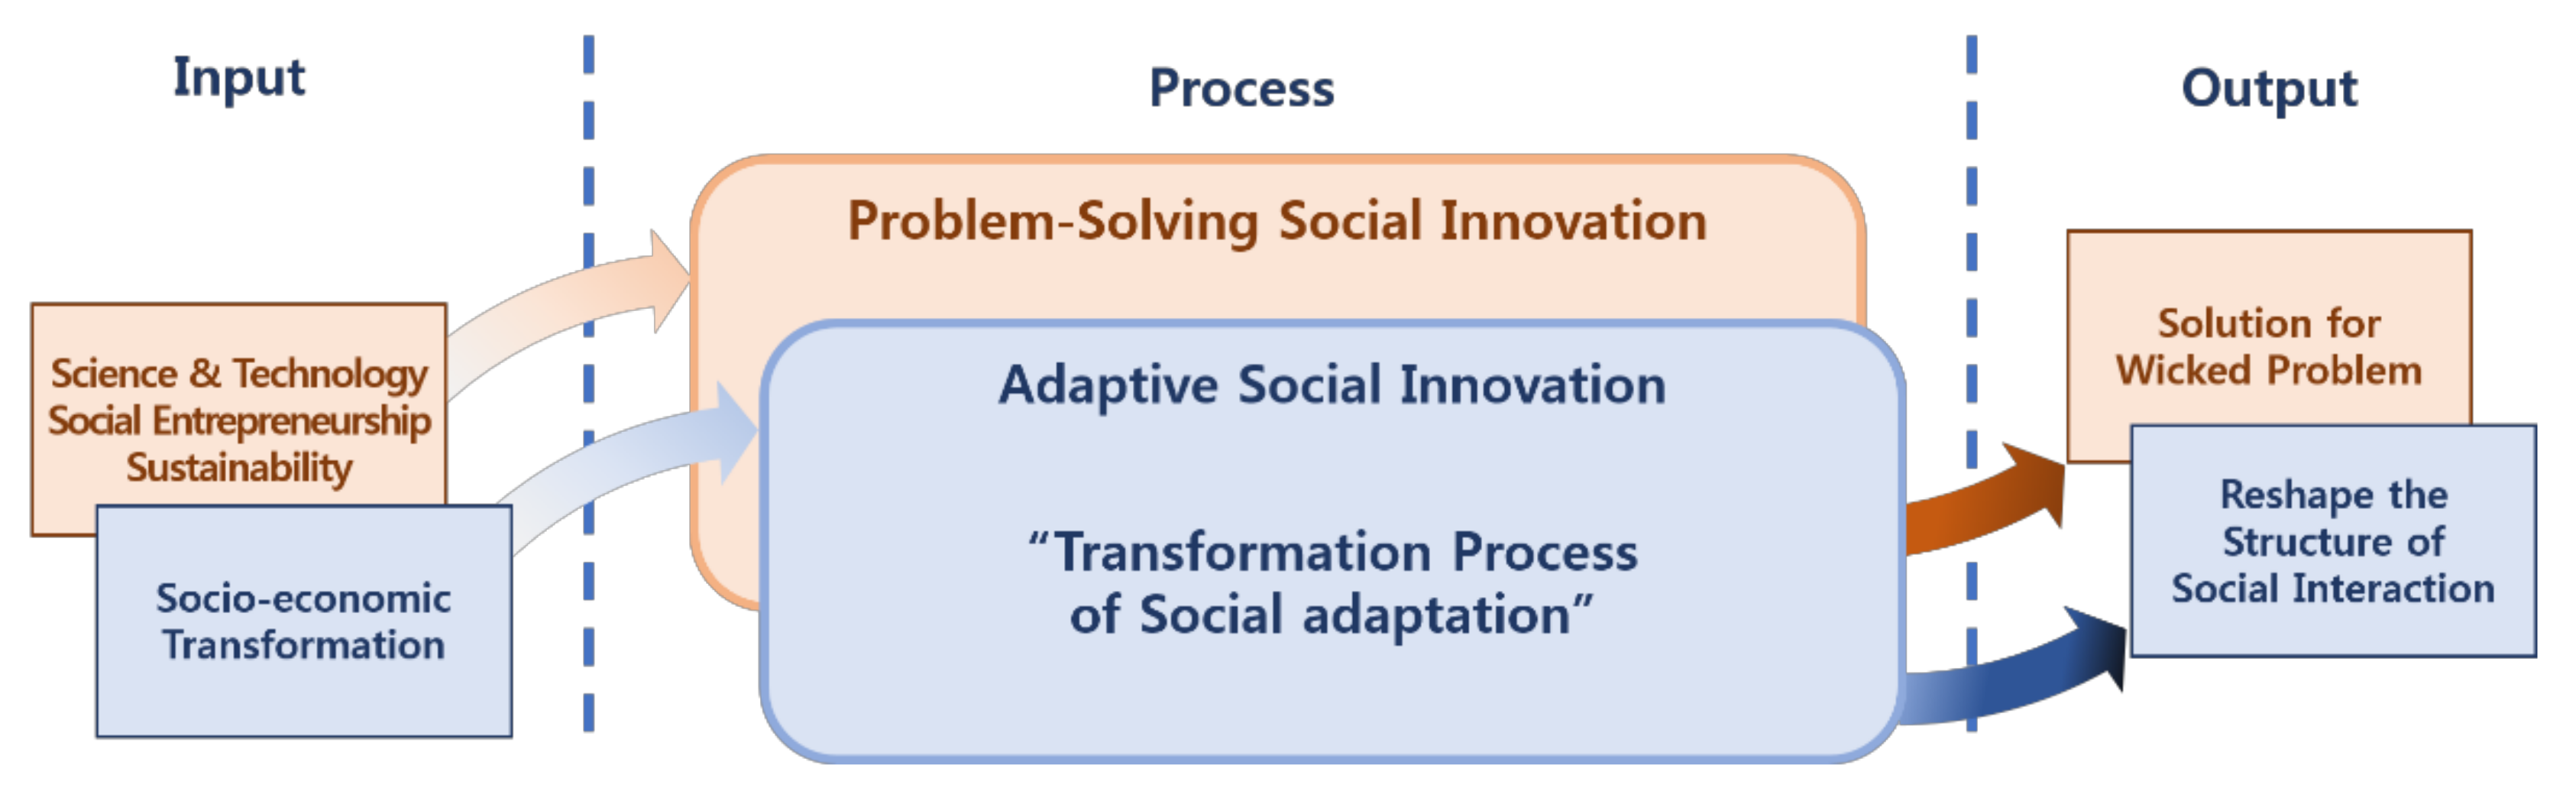 Sustainability | Free Full-Text | Adaptive Social Innovation Derived from  Digital Economy and Its Impact on Society and Policy | HTML